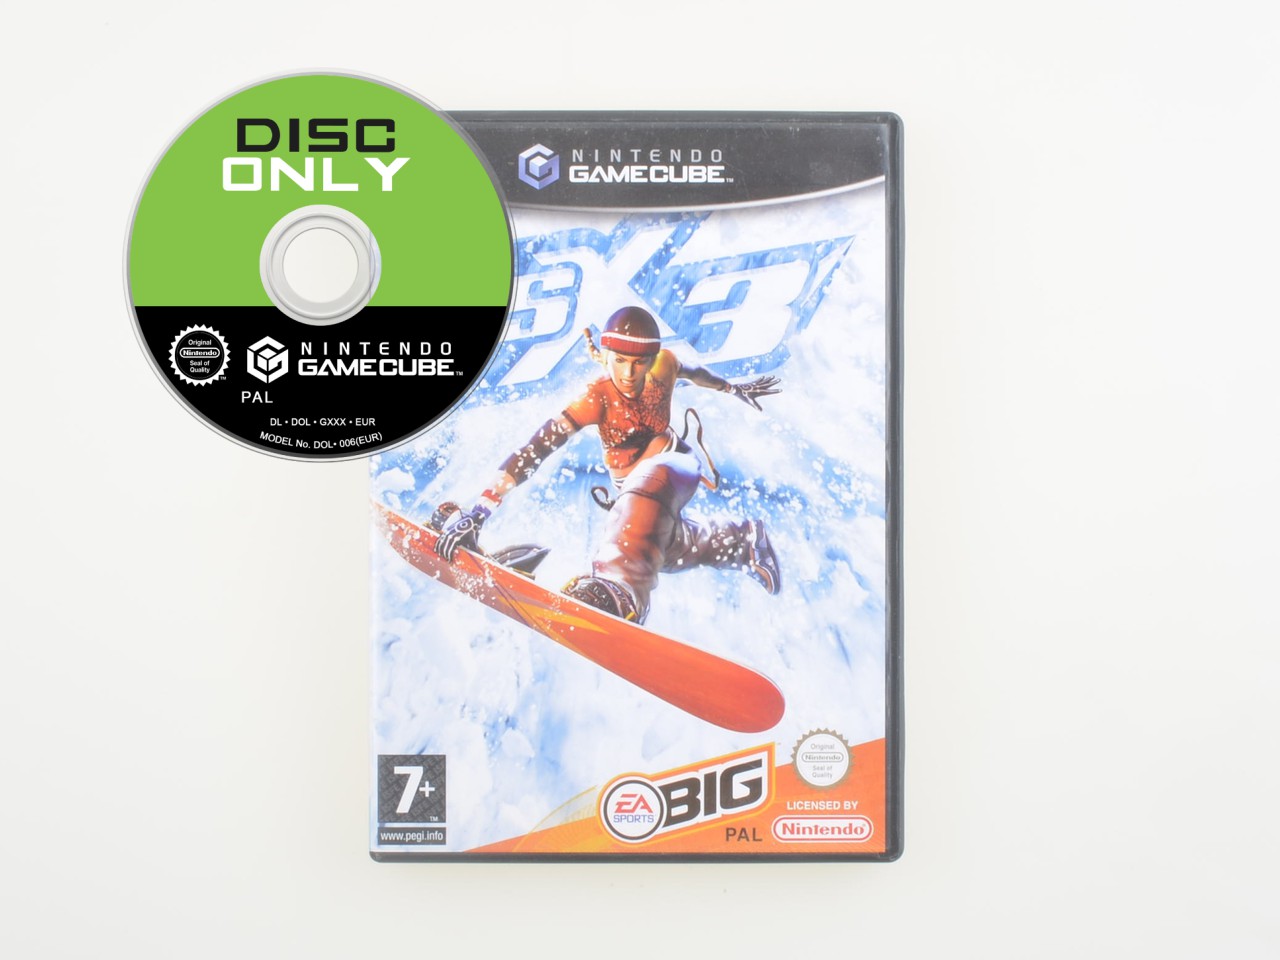 SSX 3 - Disc Only Kopen | Gamecube Games